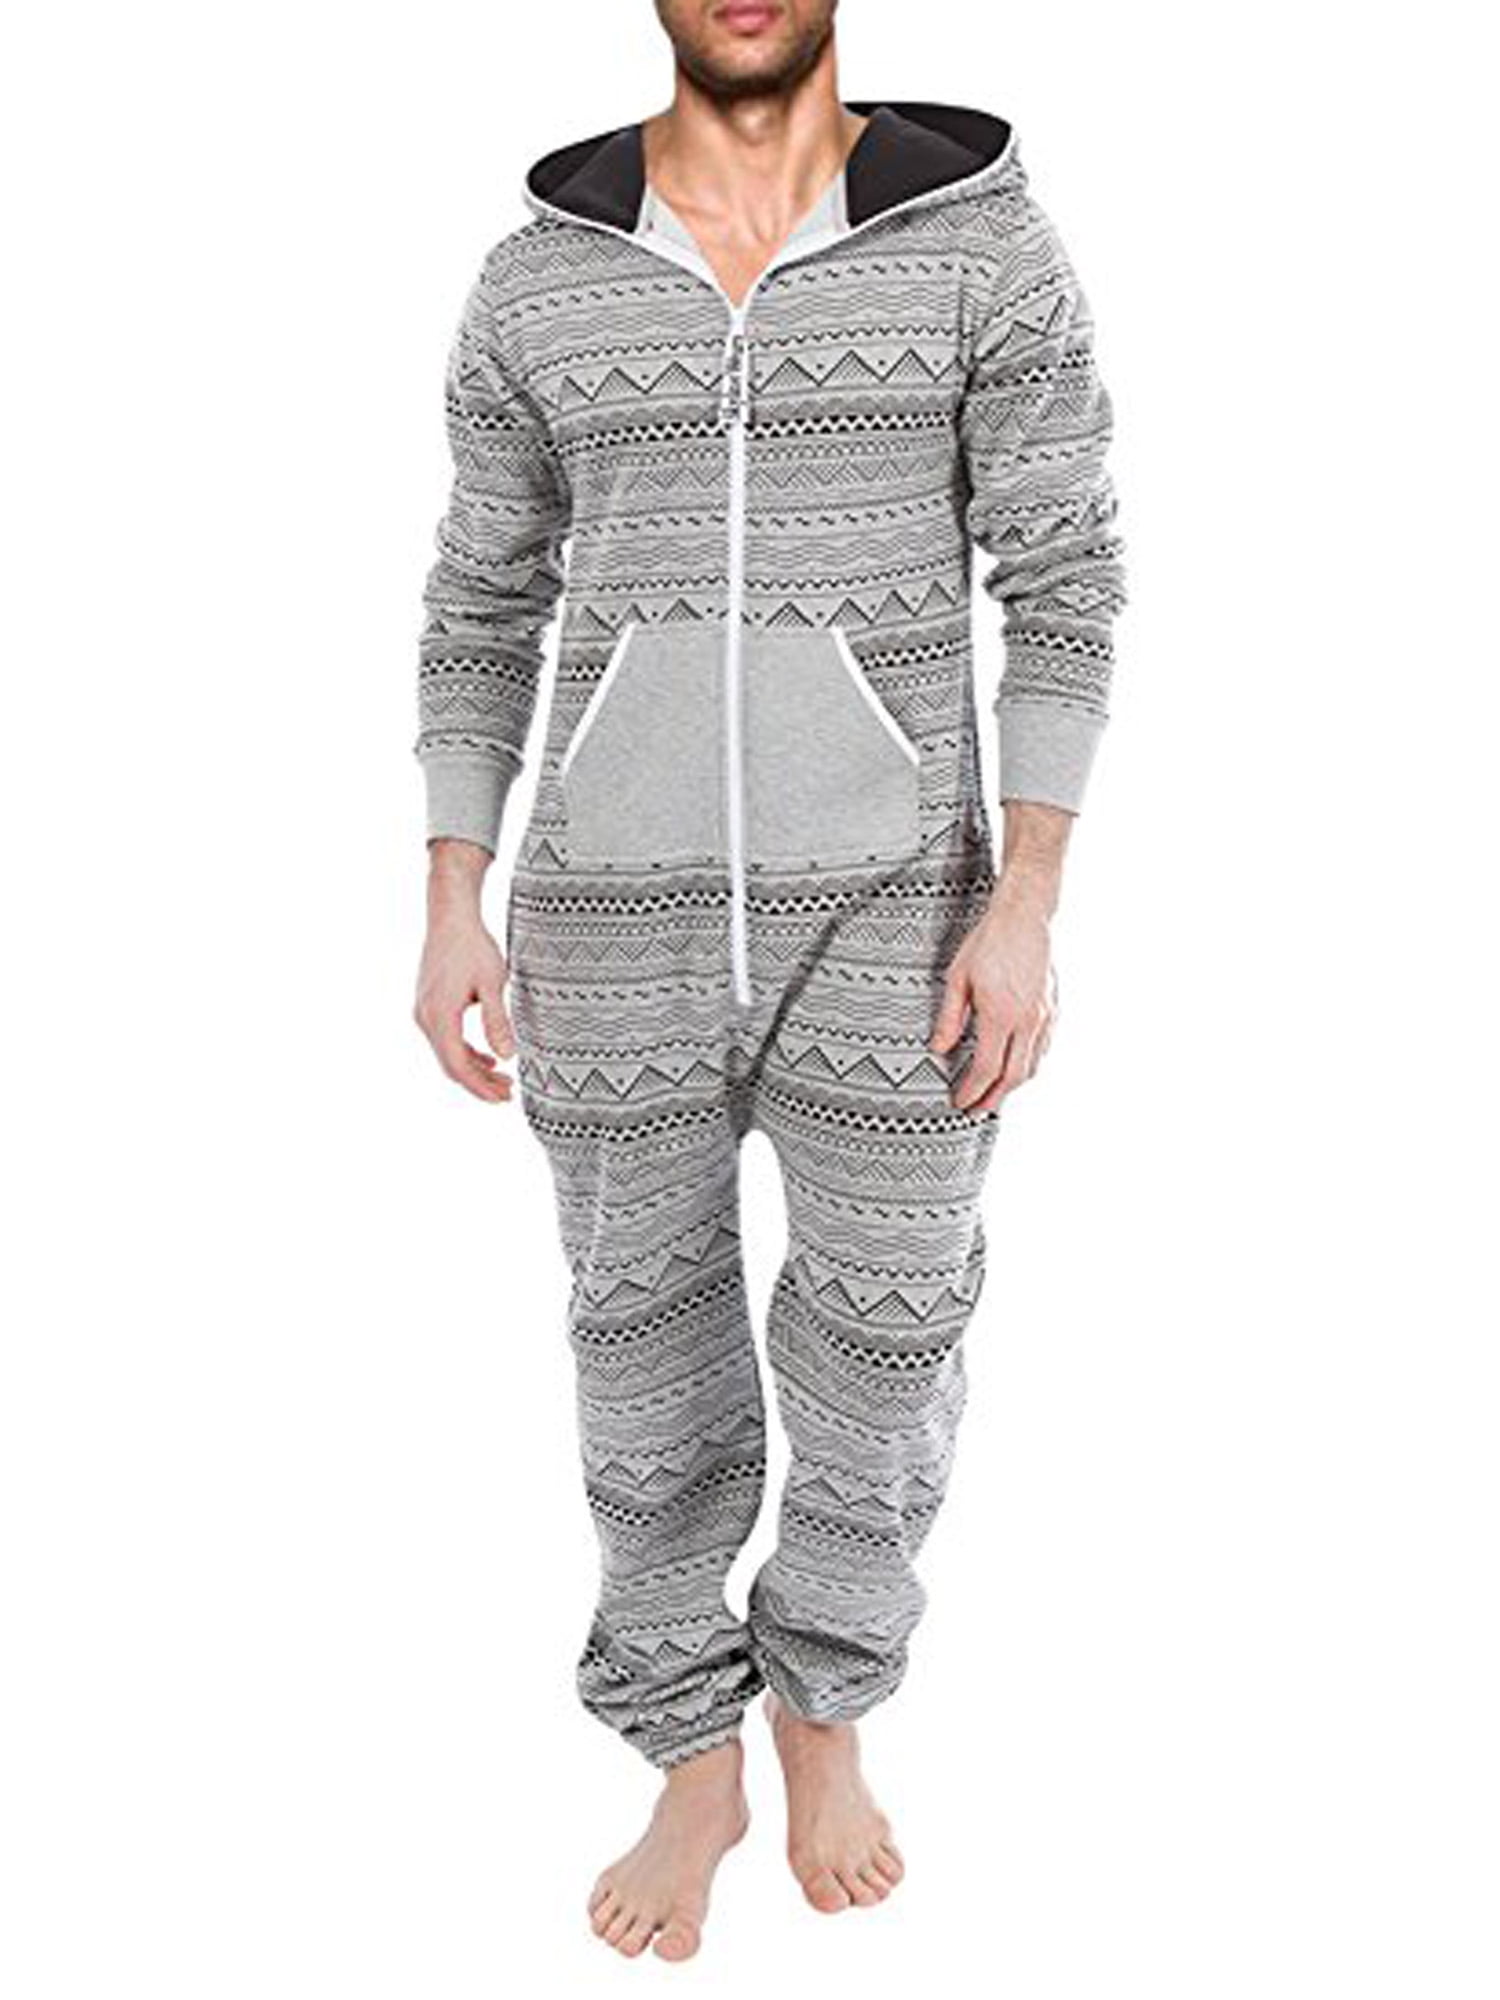 Adult Onesie Pajamas for Men Couples Matching Non Footed One Piece Hooded Jumpsuits Mens Onesies Warm Unisex PJs 